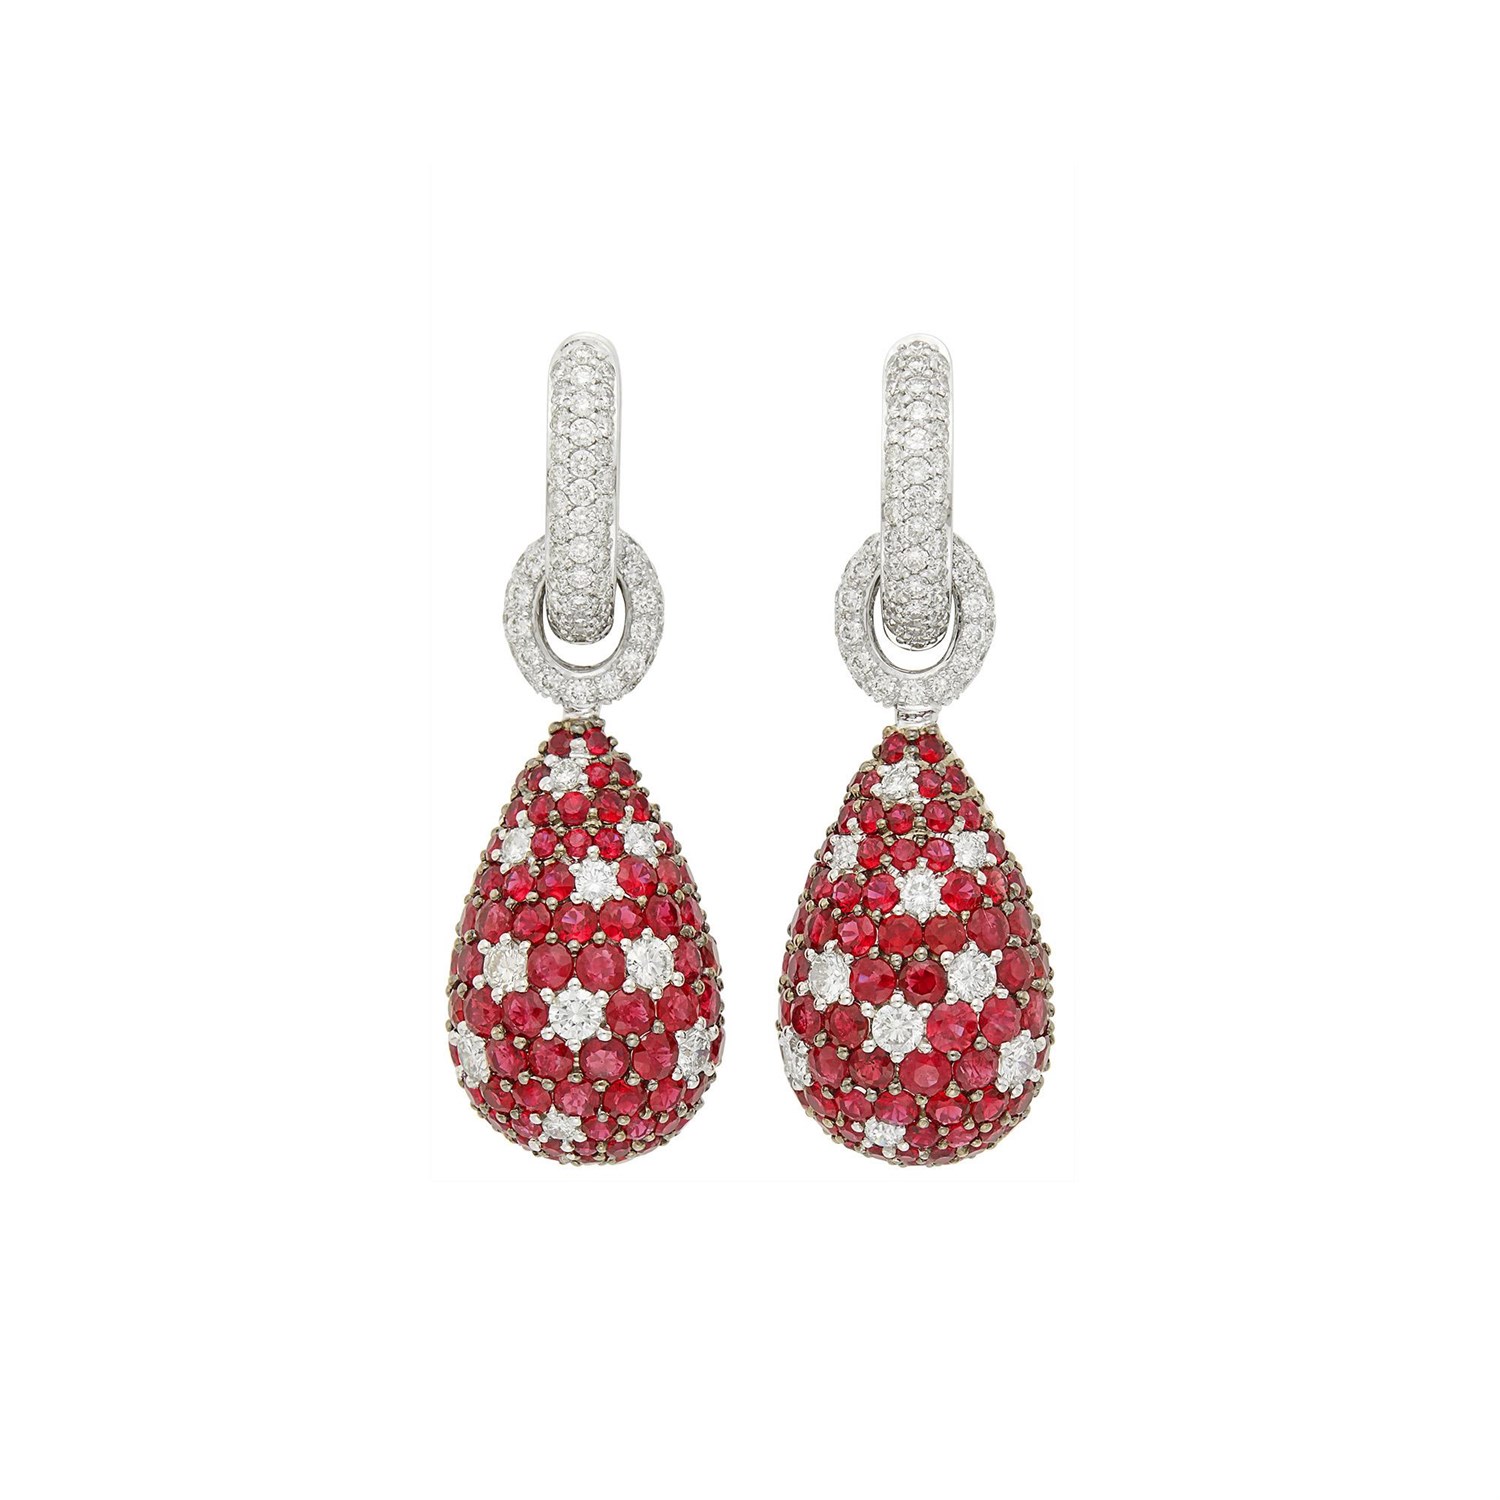 Lot 54 - Pair of White Gold, Ruby and Diamond Pendant-Earrings